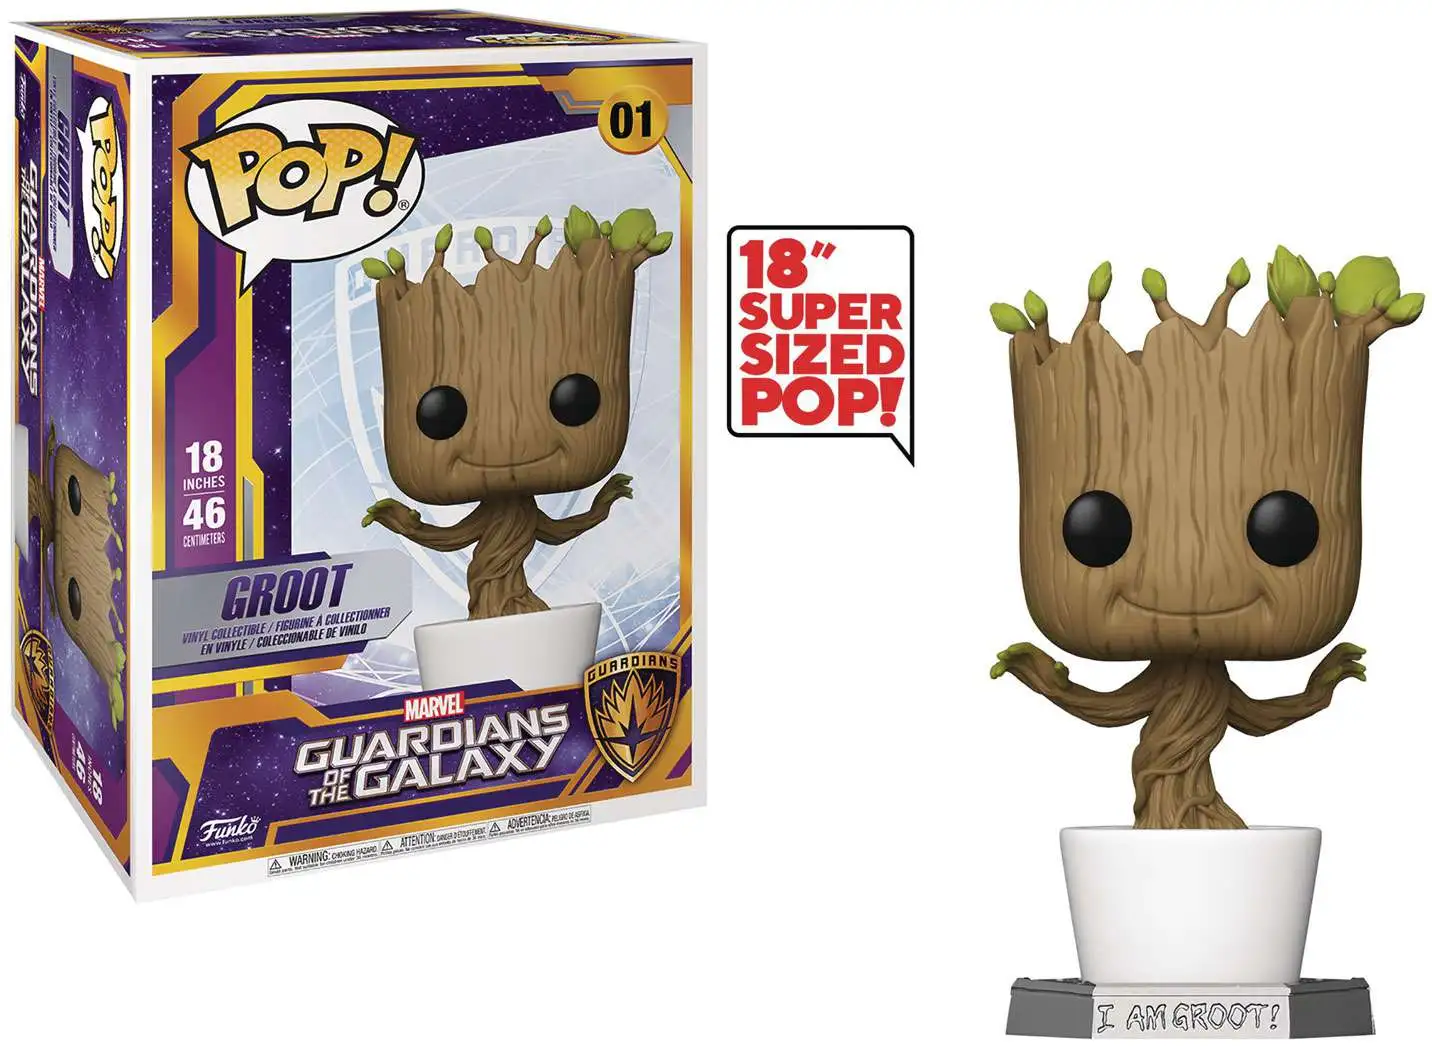 New Funko POP Marvel Dancing Groot Guardians of the Galaxy Bobble Action Figure 